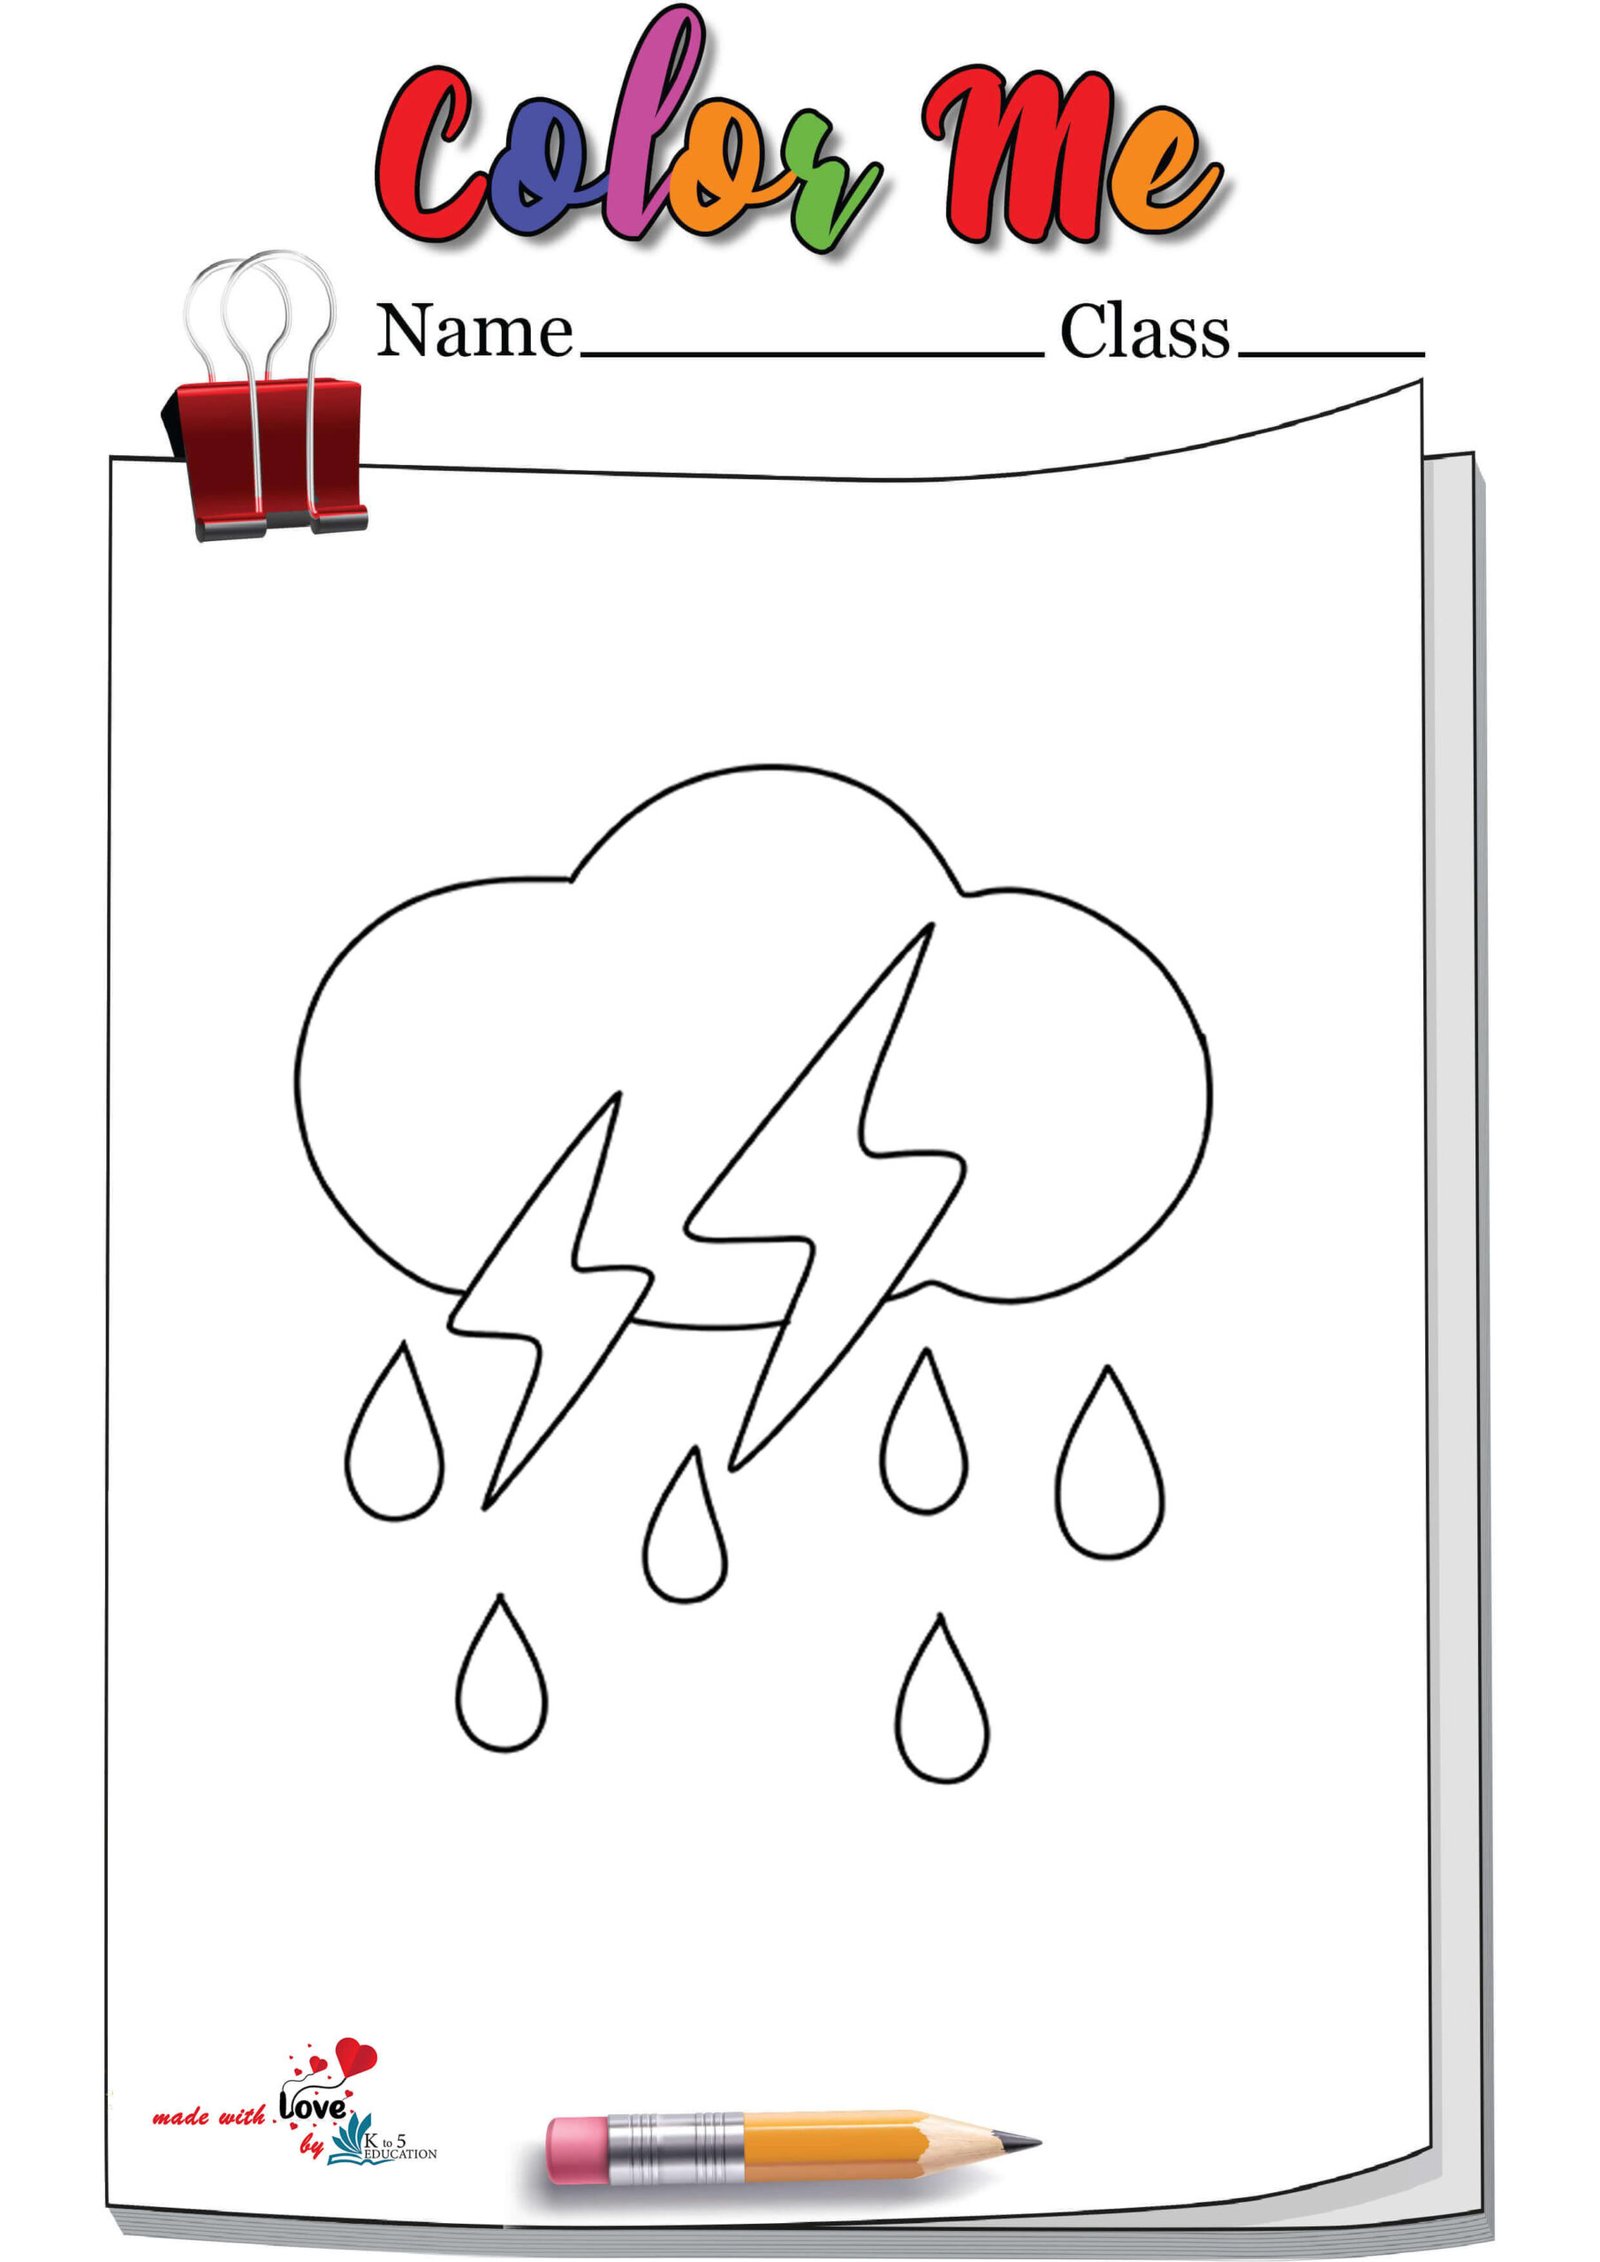 Thunder Cloud And Rain Coloring Page